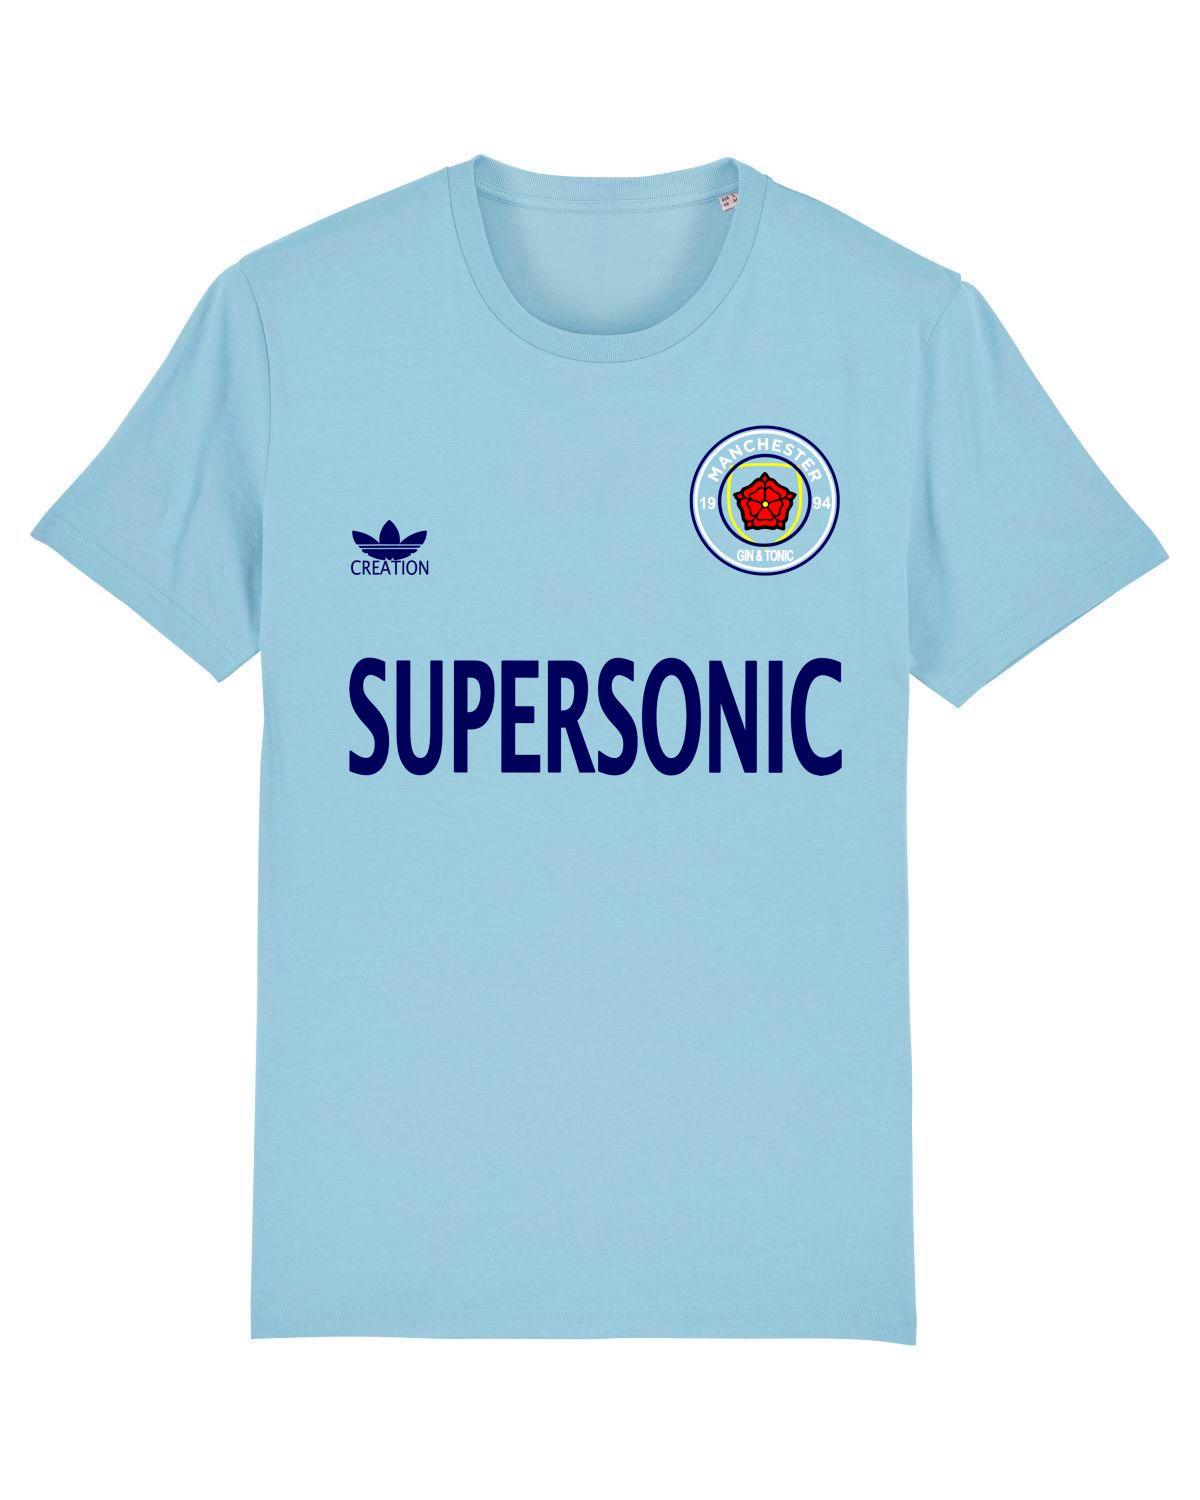 SUPERSONIC: T-Shirt Inspired by Oasis, Football & Man City - SOUND IS COLOUR